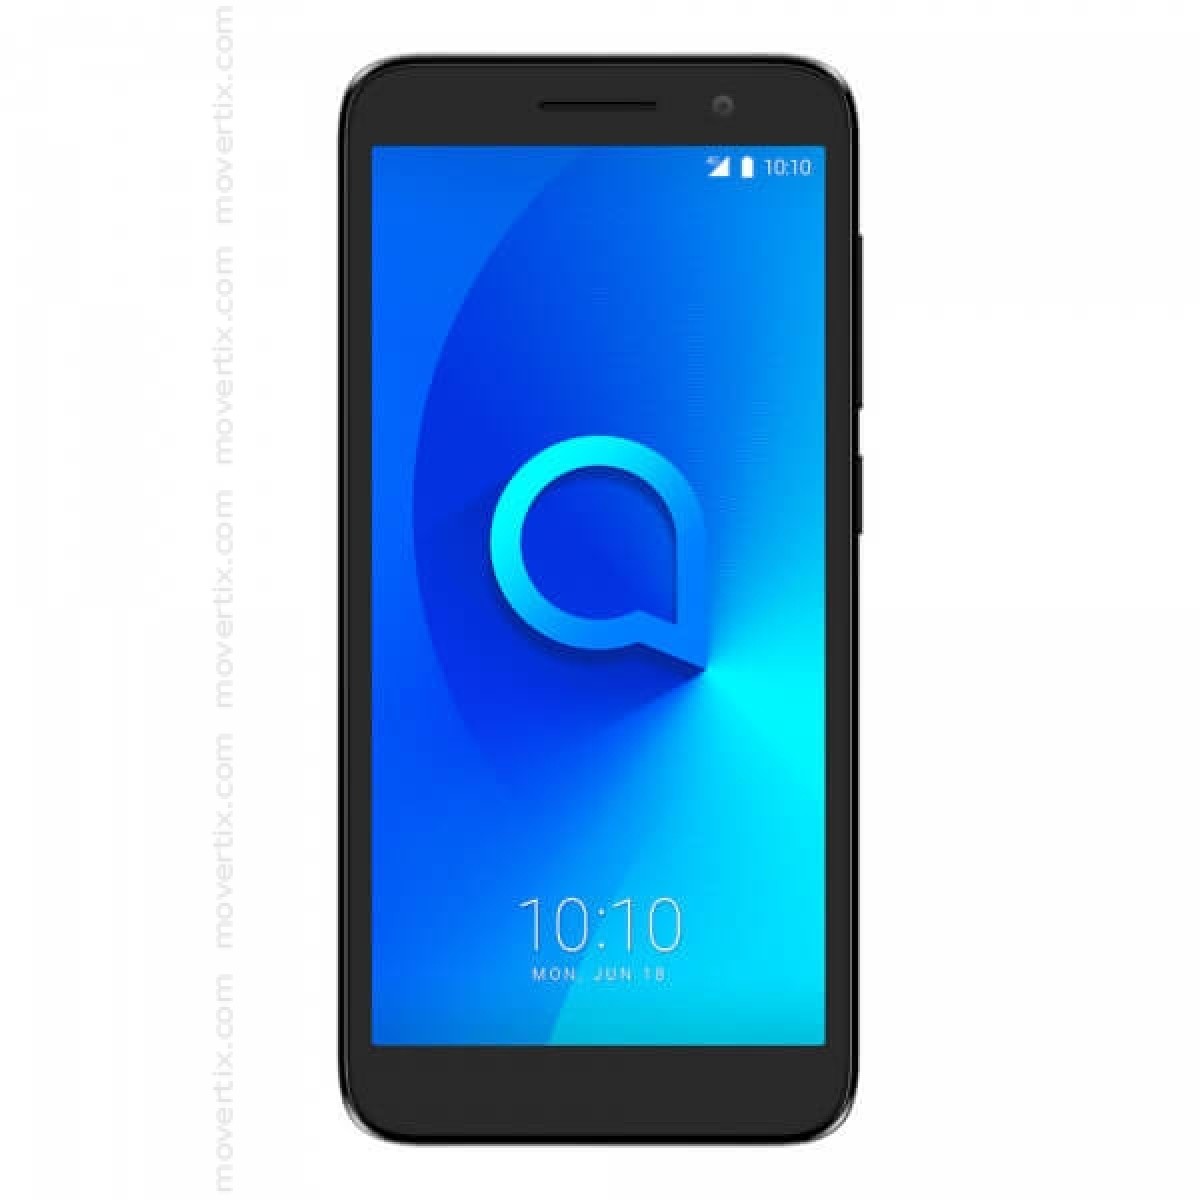 cell location reviews Alcatel 1